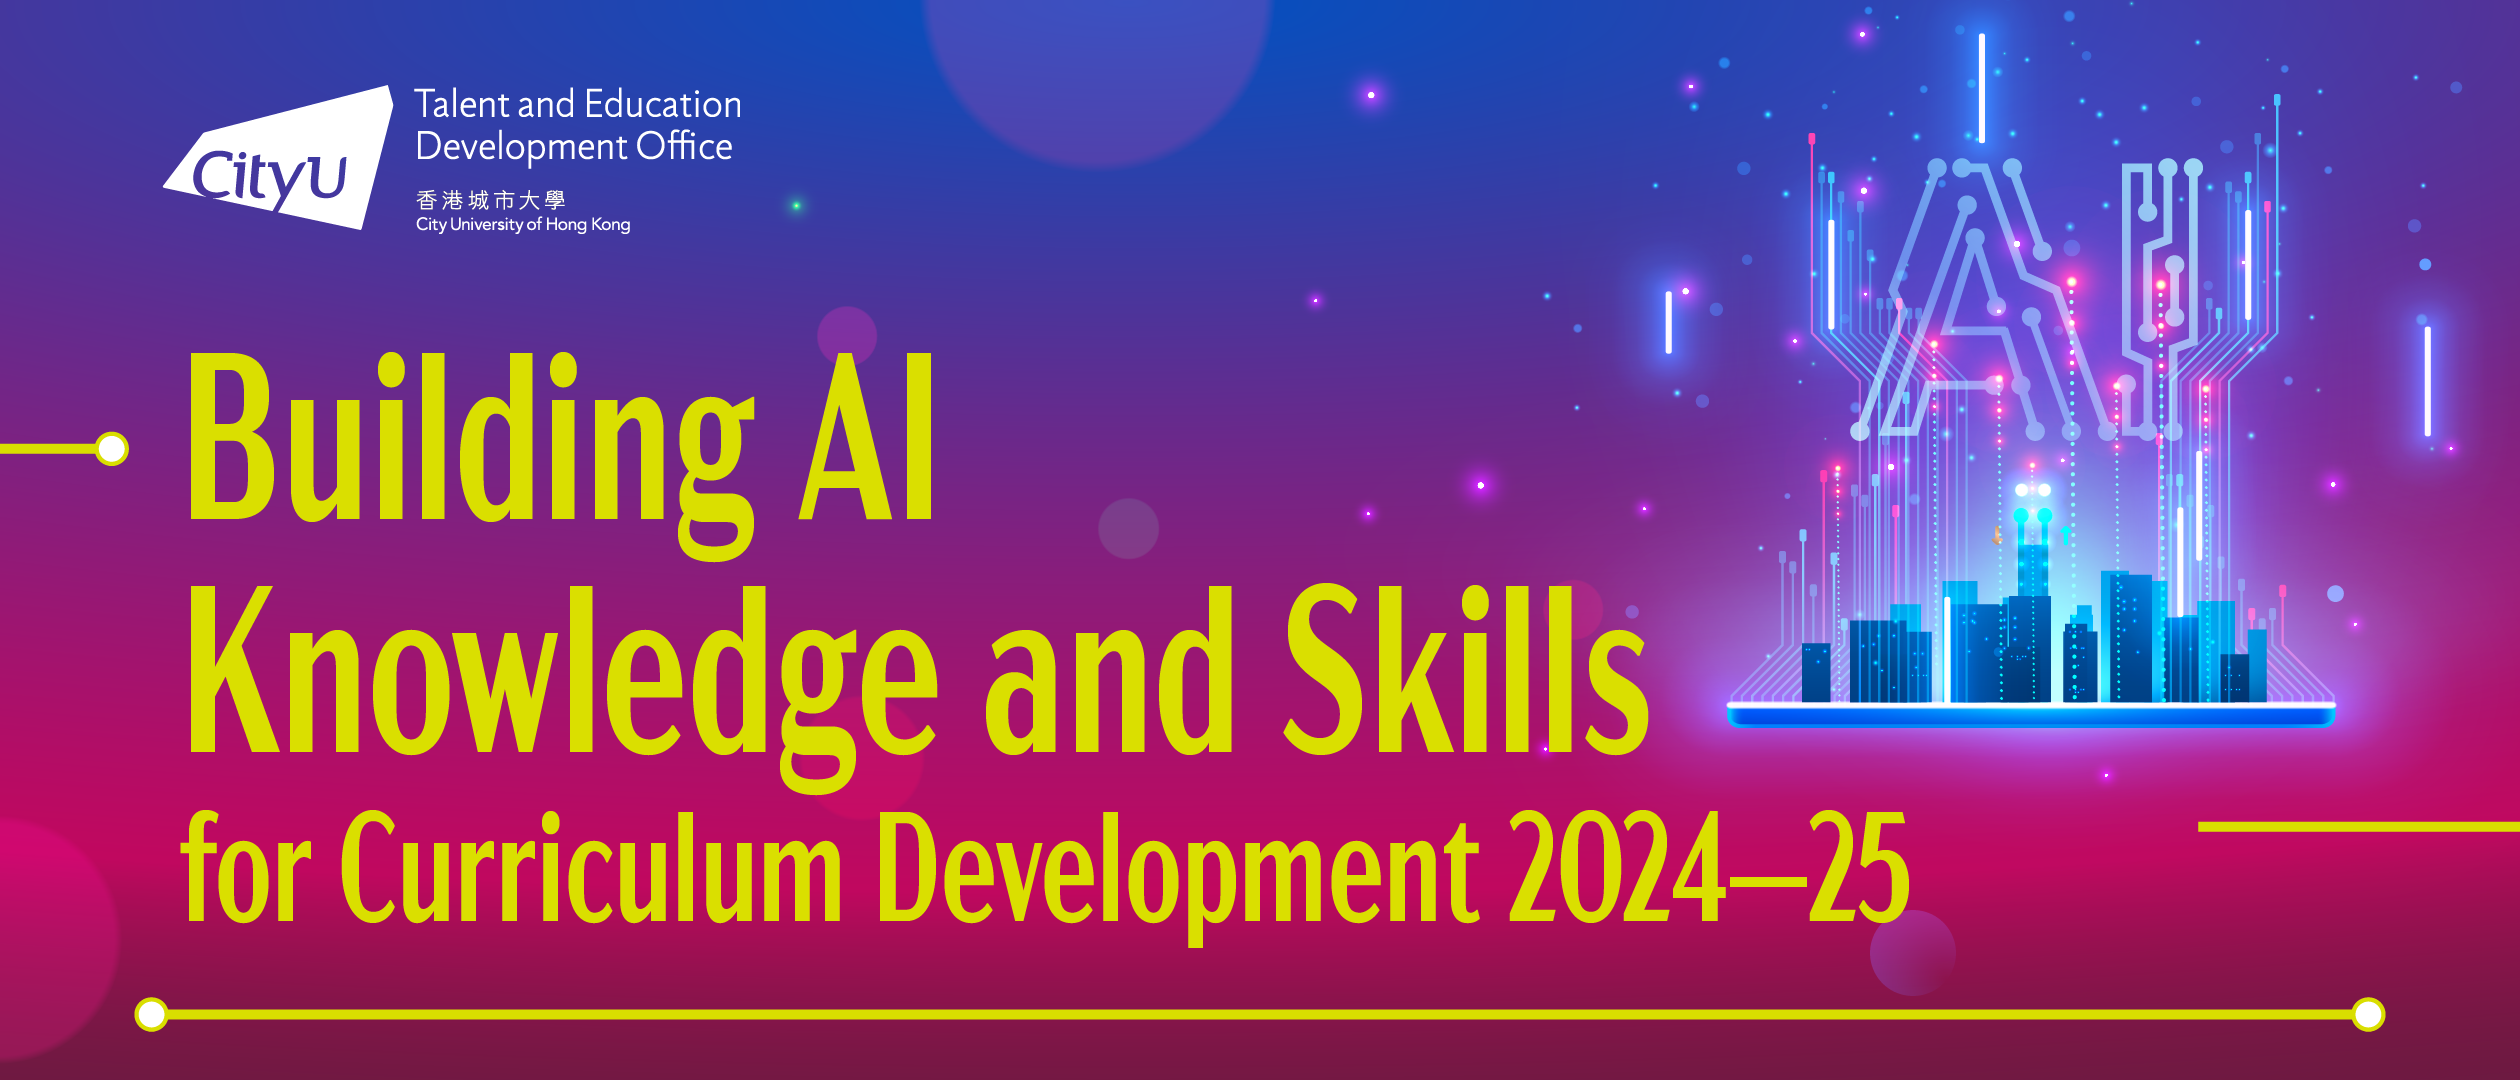 Building AI Knowledge and Skills for Curriculum Development 2024-25